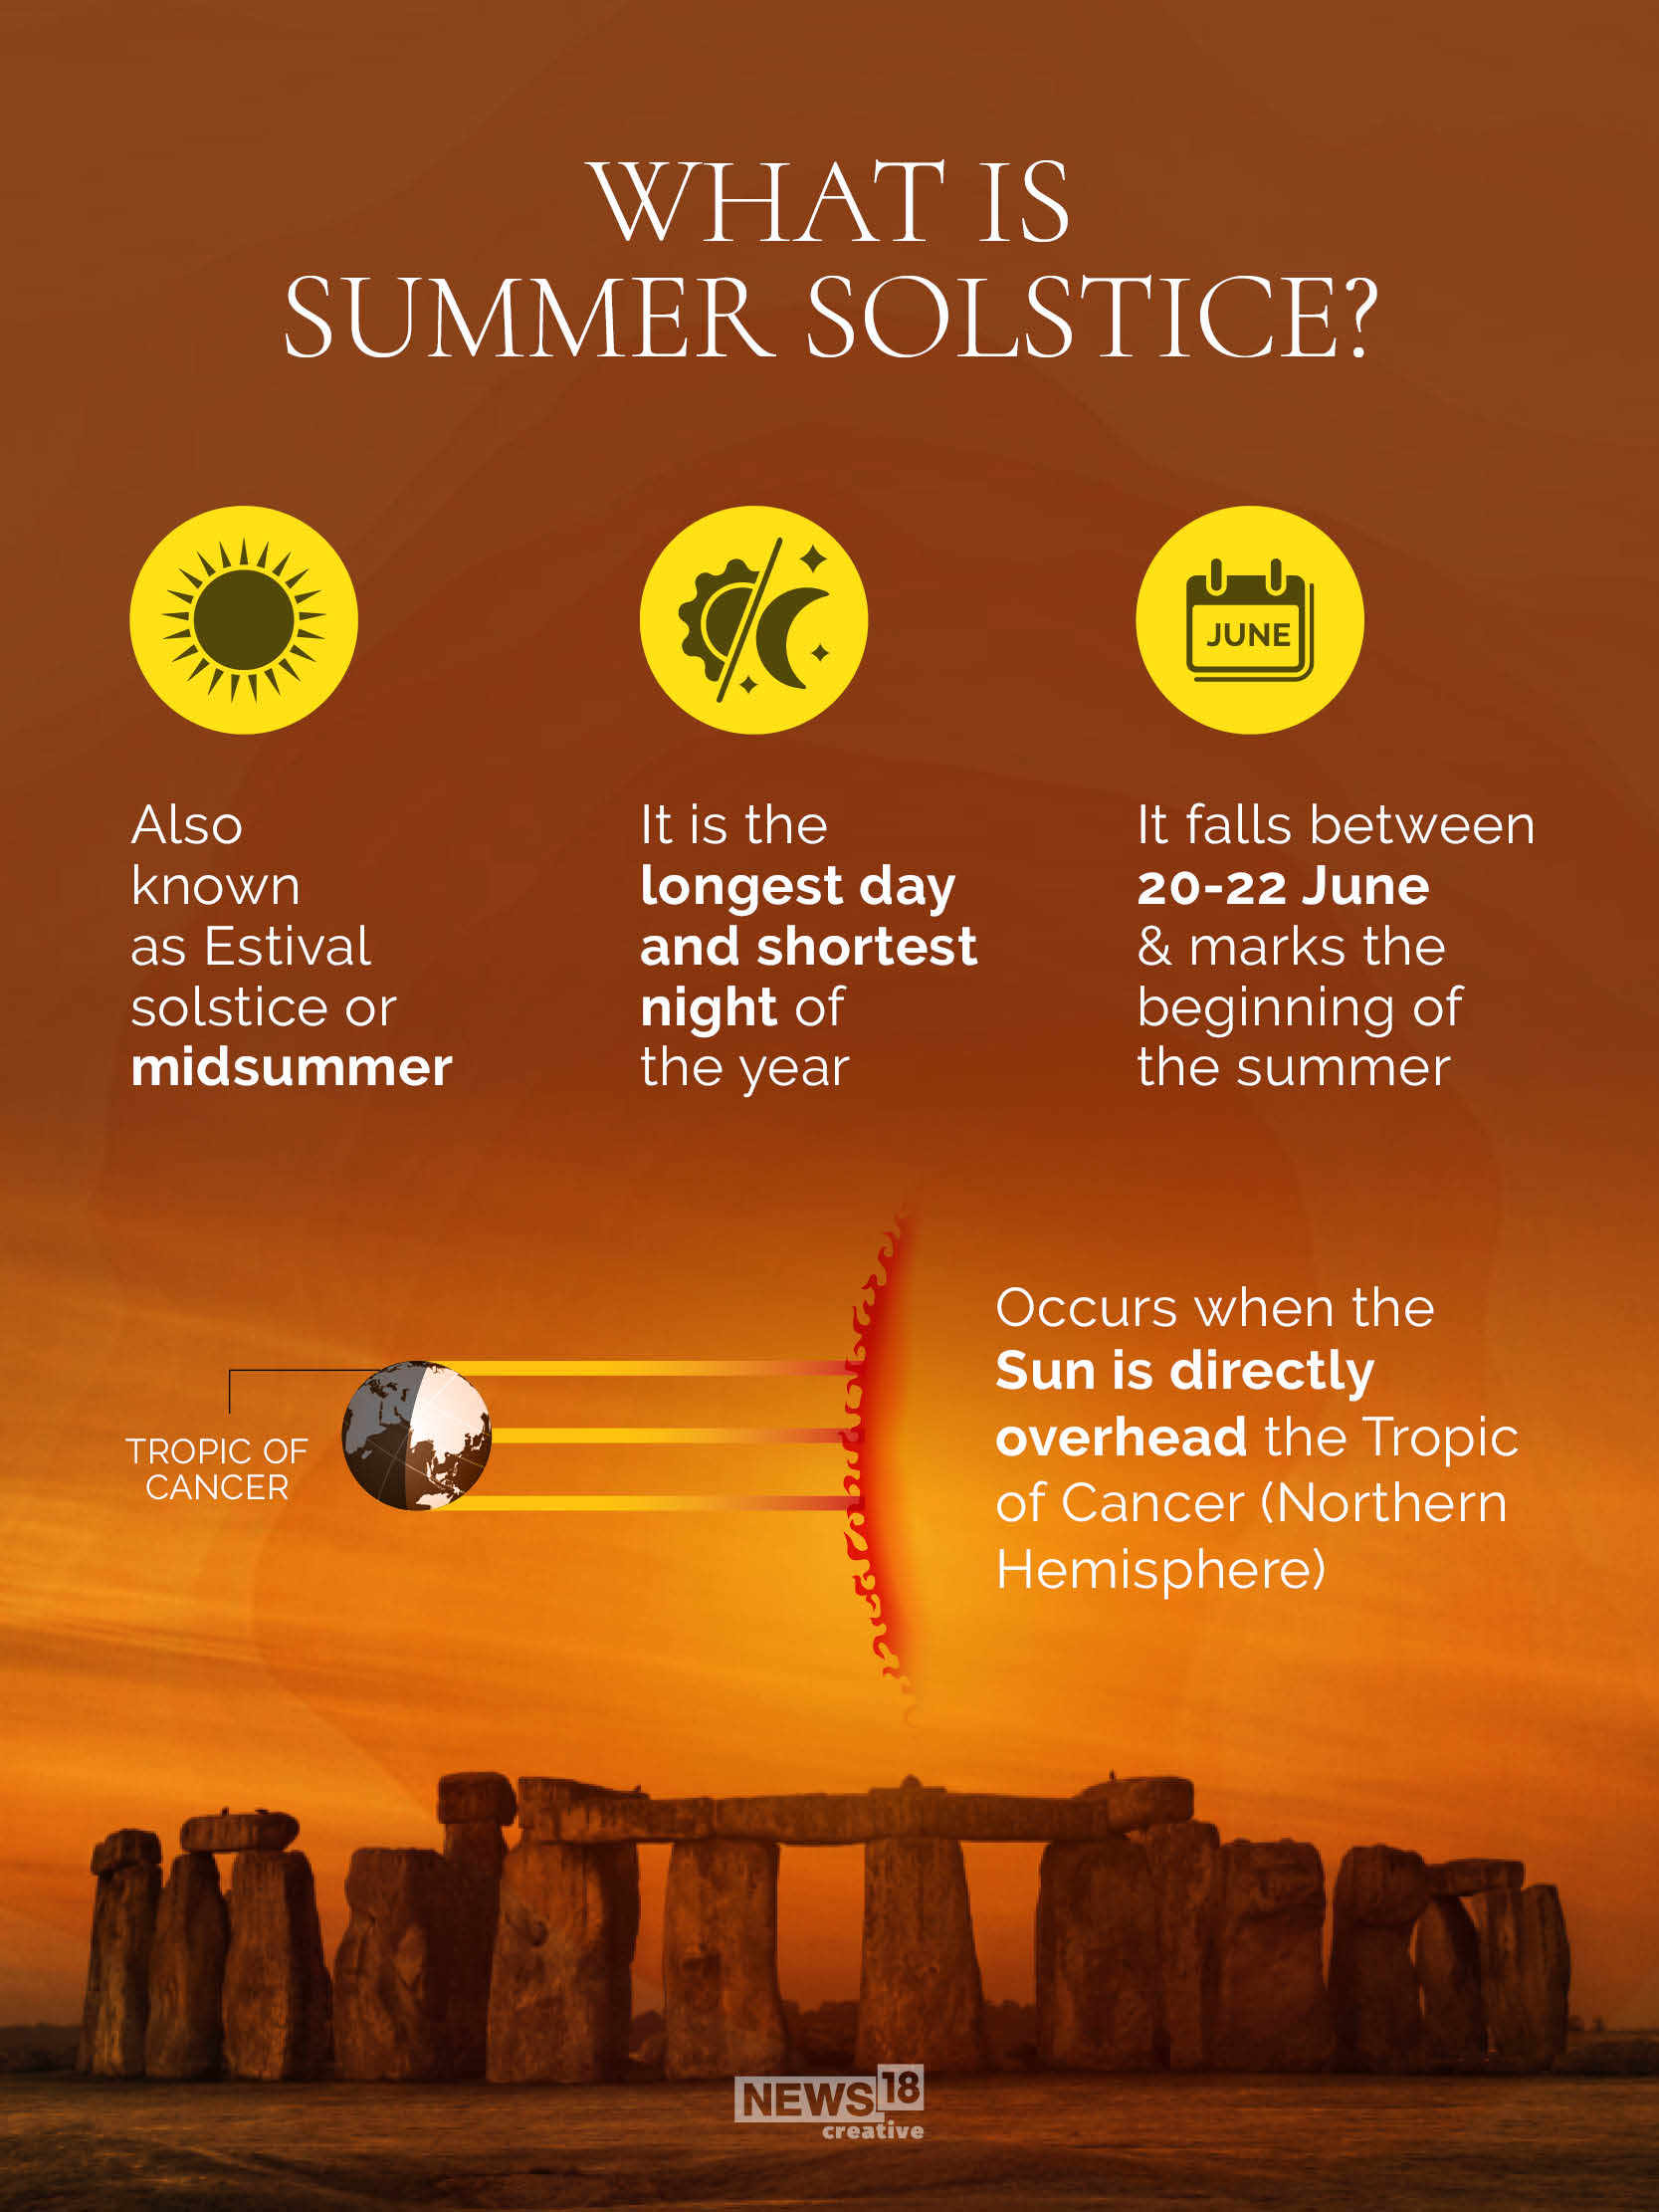 Summer Solstice 2021: Things to Know About The Longest Day of The Year